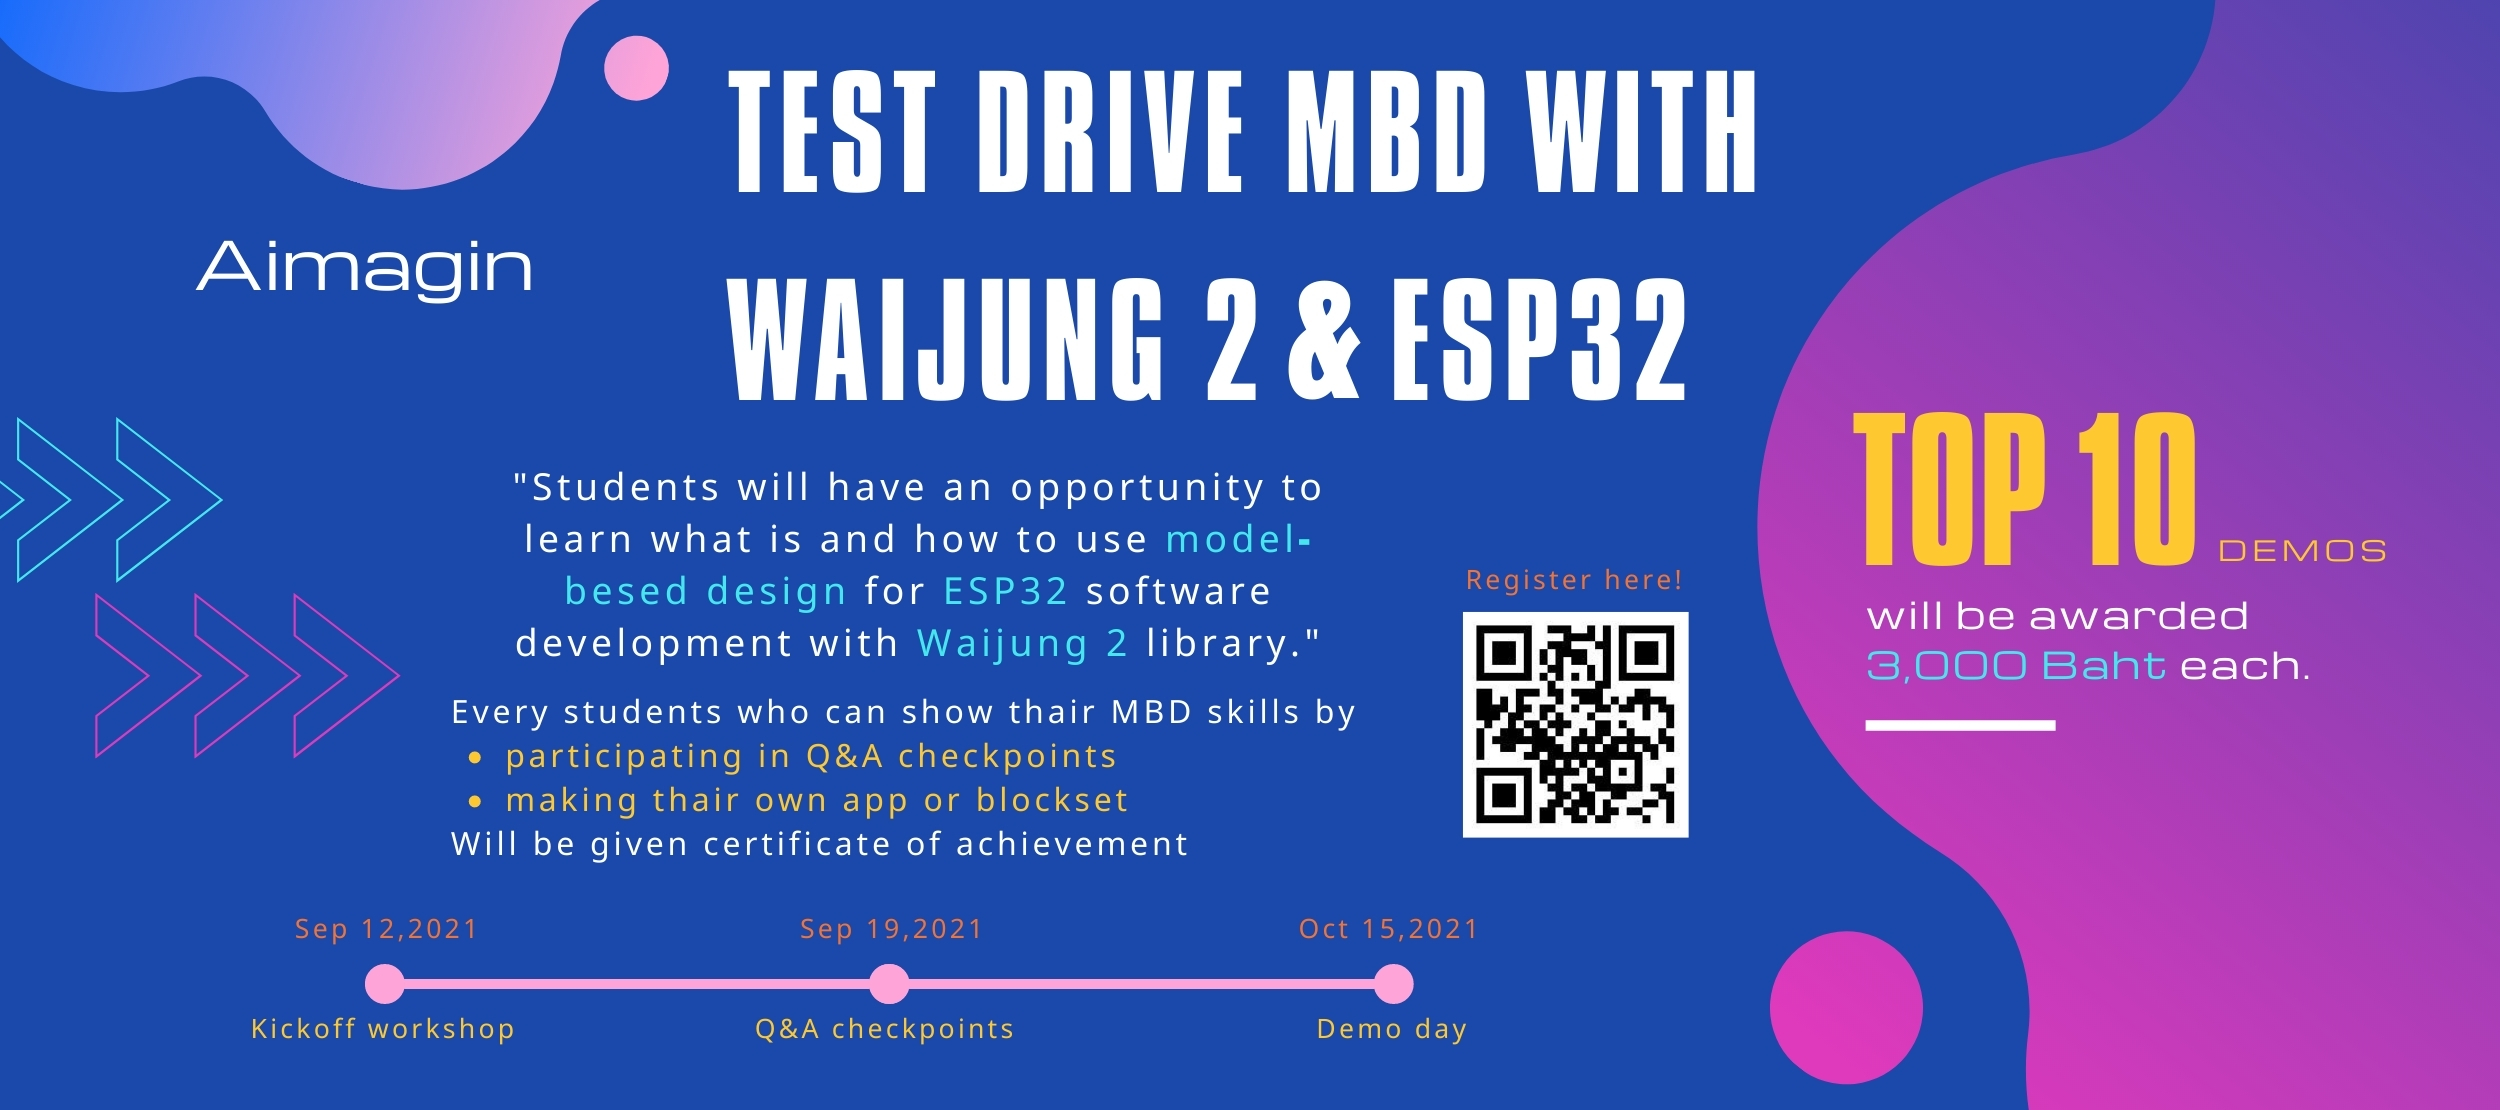 Test Drive MBD with Waijung 2 & ESP32